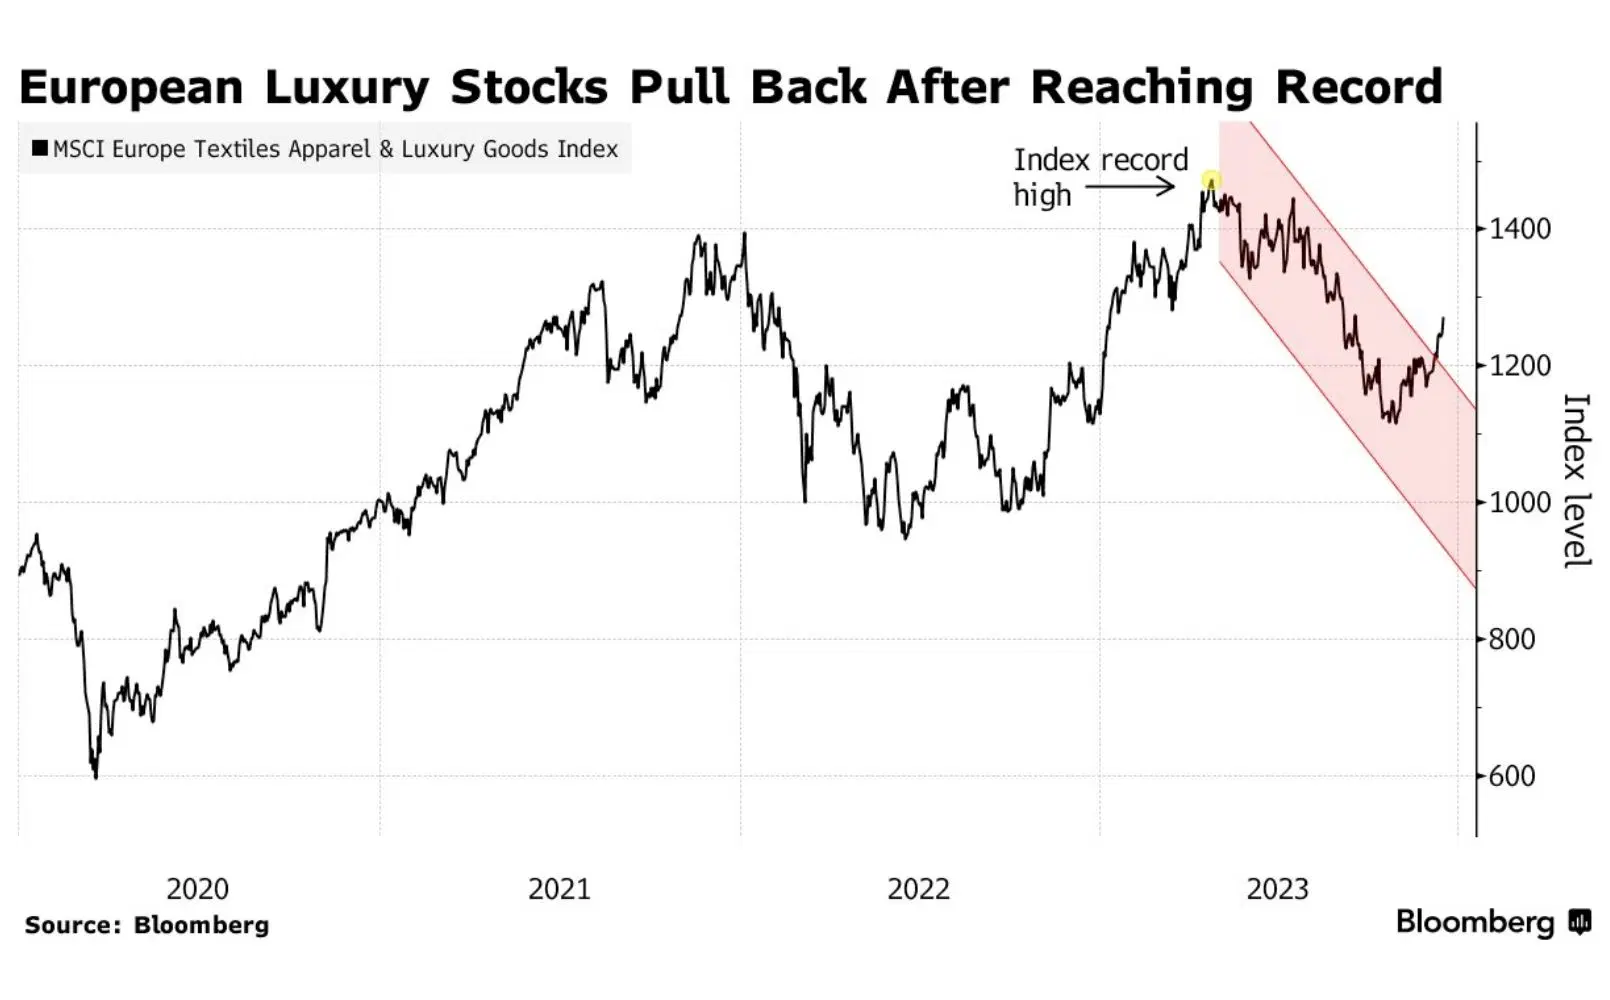 European Luxury Stocks Pull Back After Reaching Record